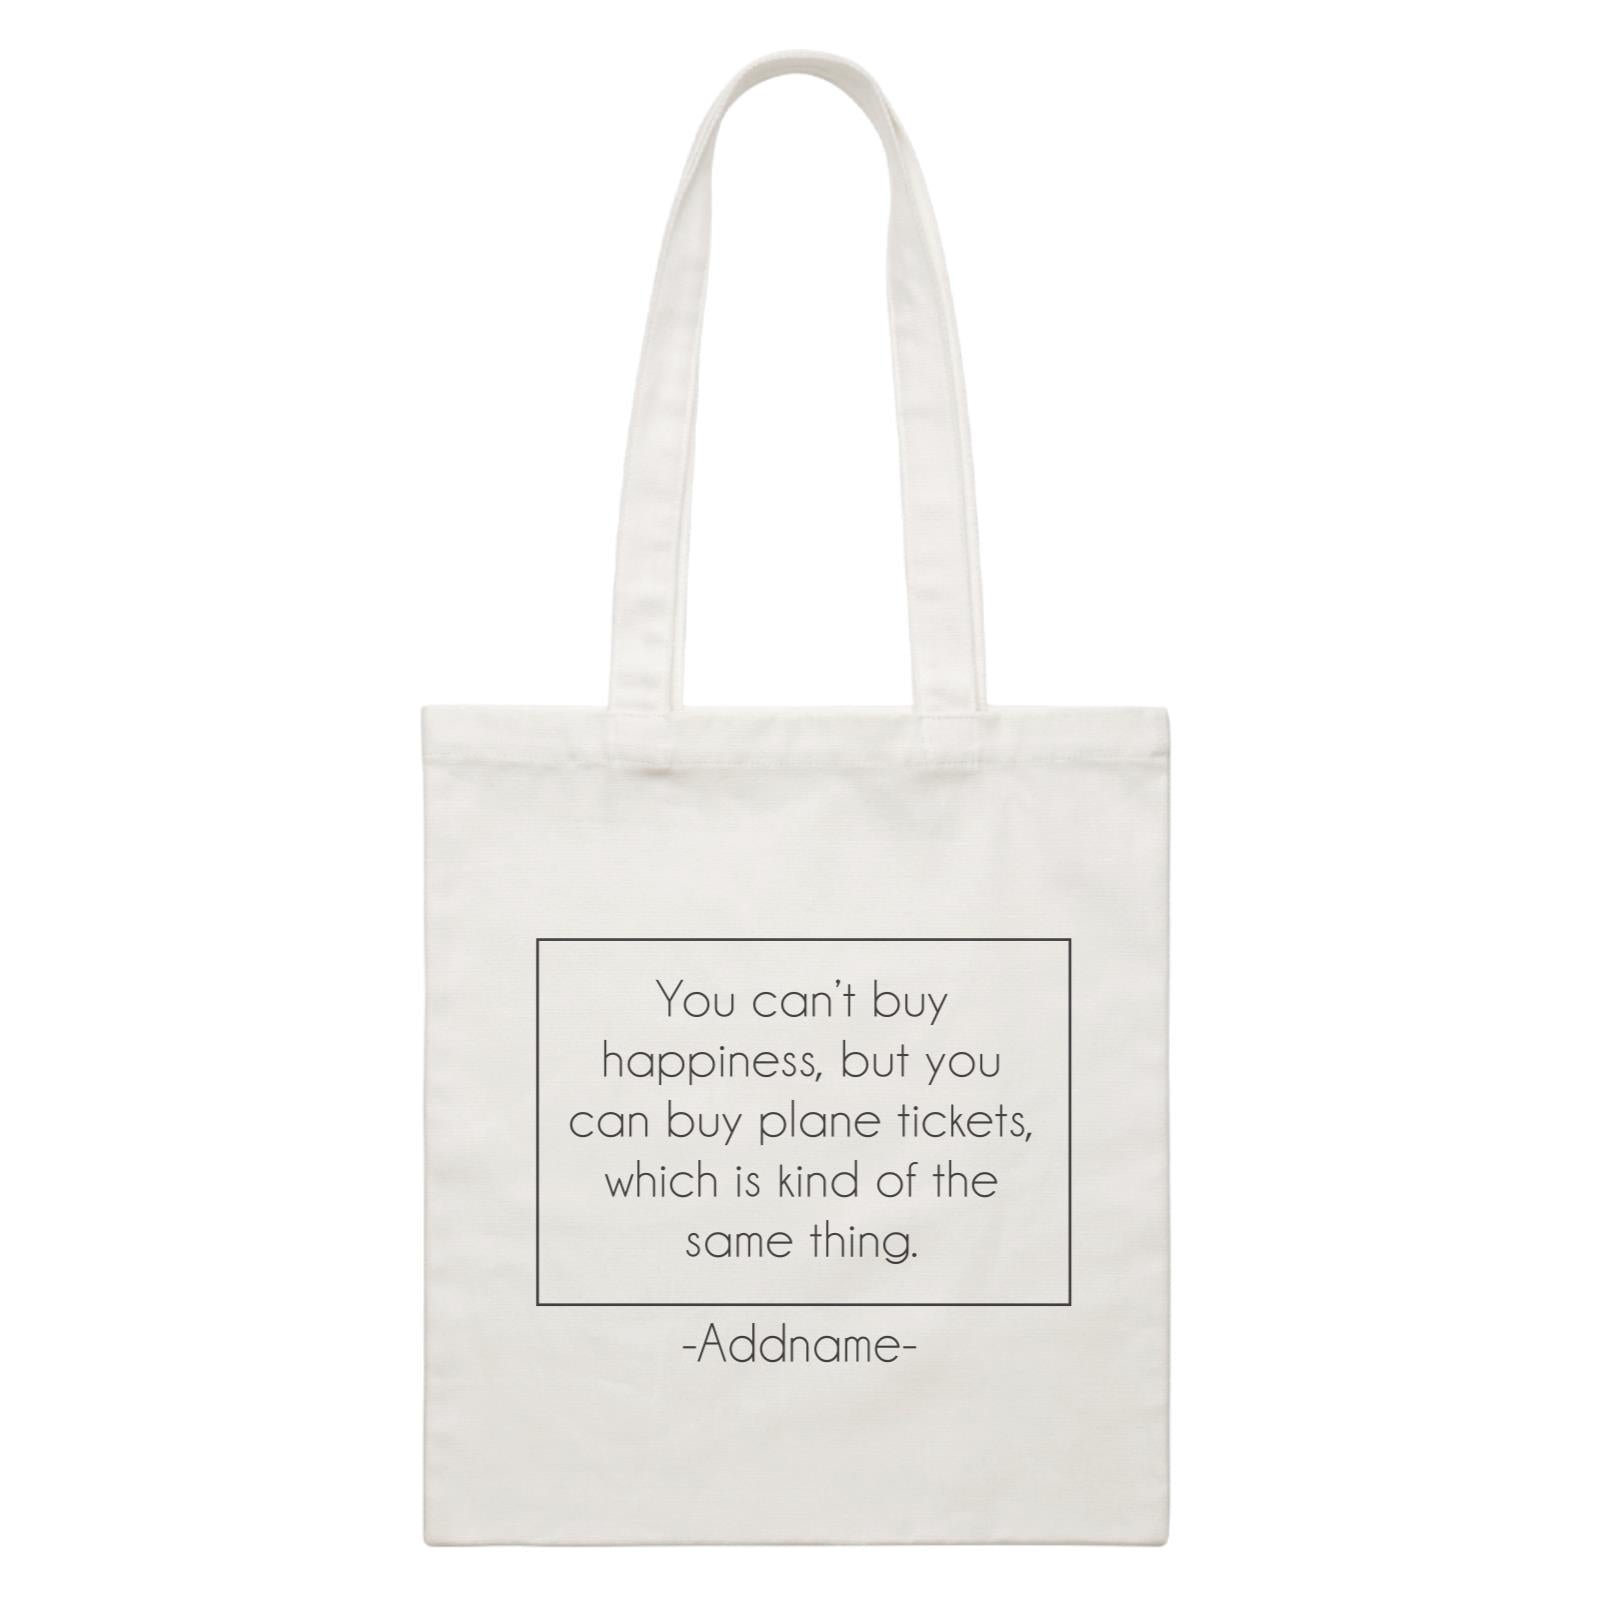 Travel Quotes You Can't Buy Happiness But You Can Buy Plane Tickets Addname White Canvas Bag